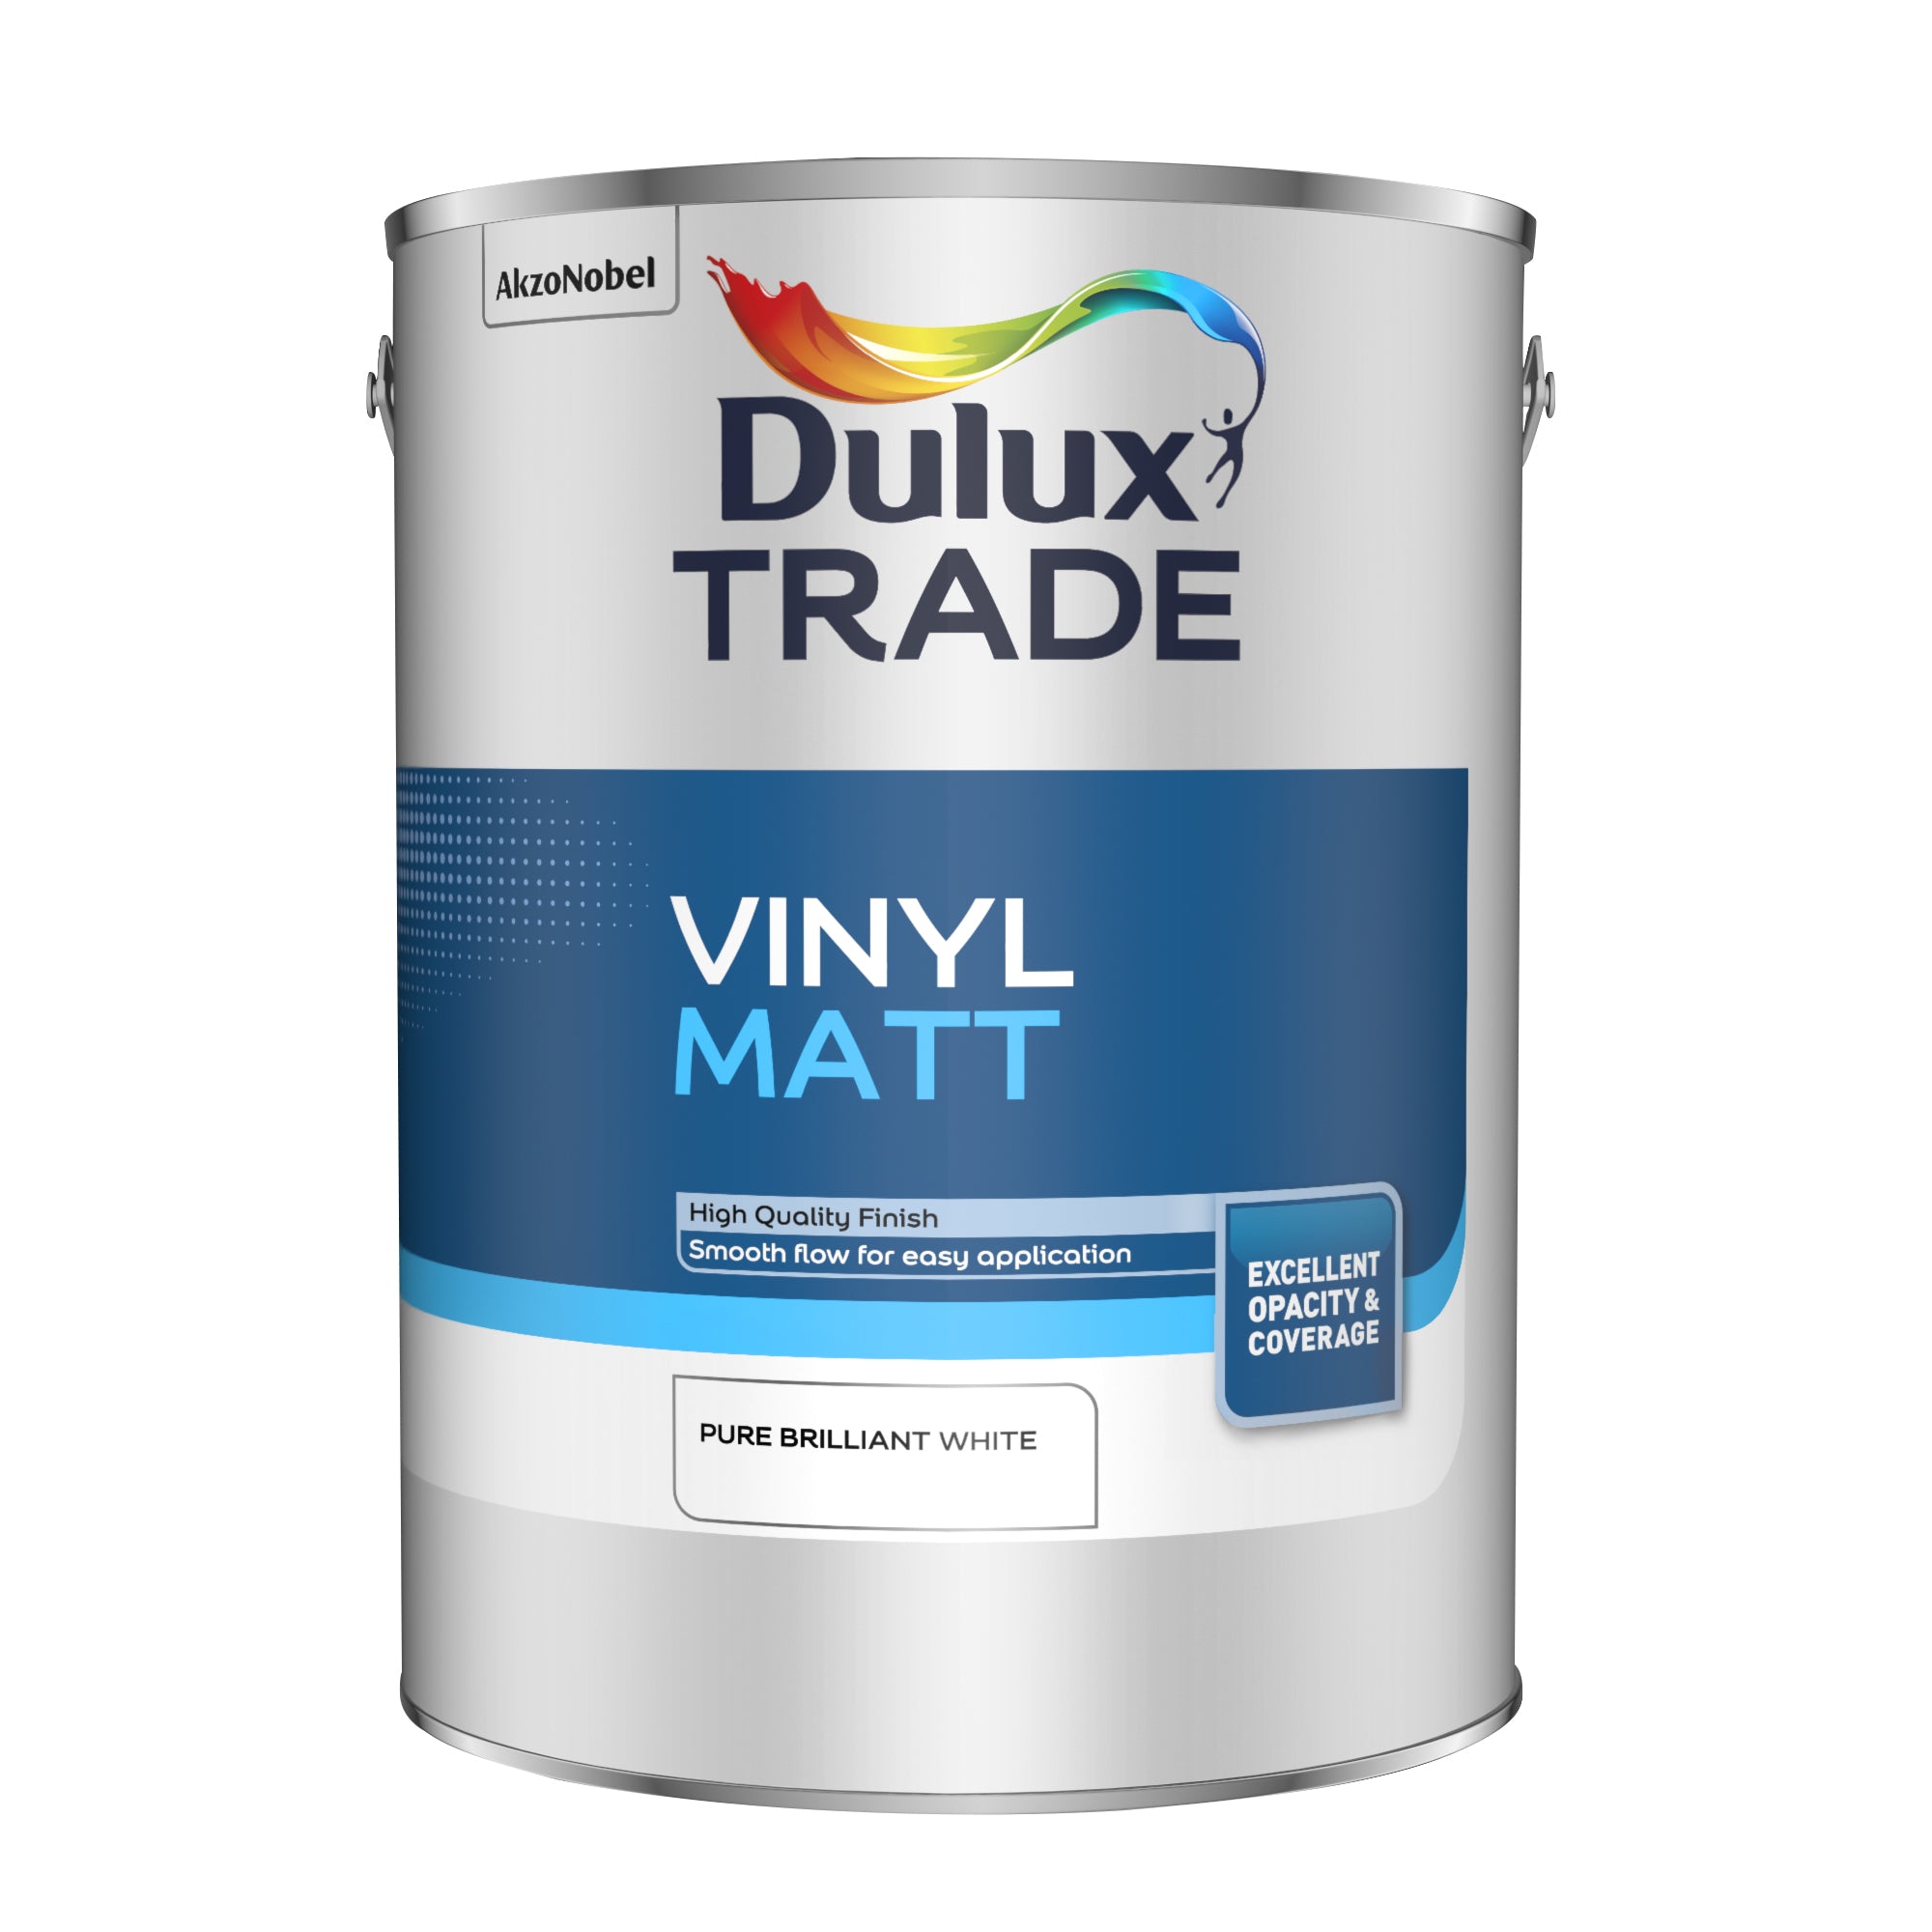 Dulux Trade 90YR 34/084 - Natural taupe 1 Paint Aerosol/Litre Tins